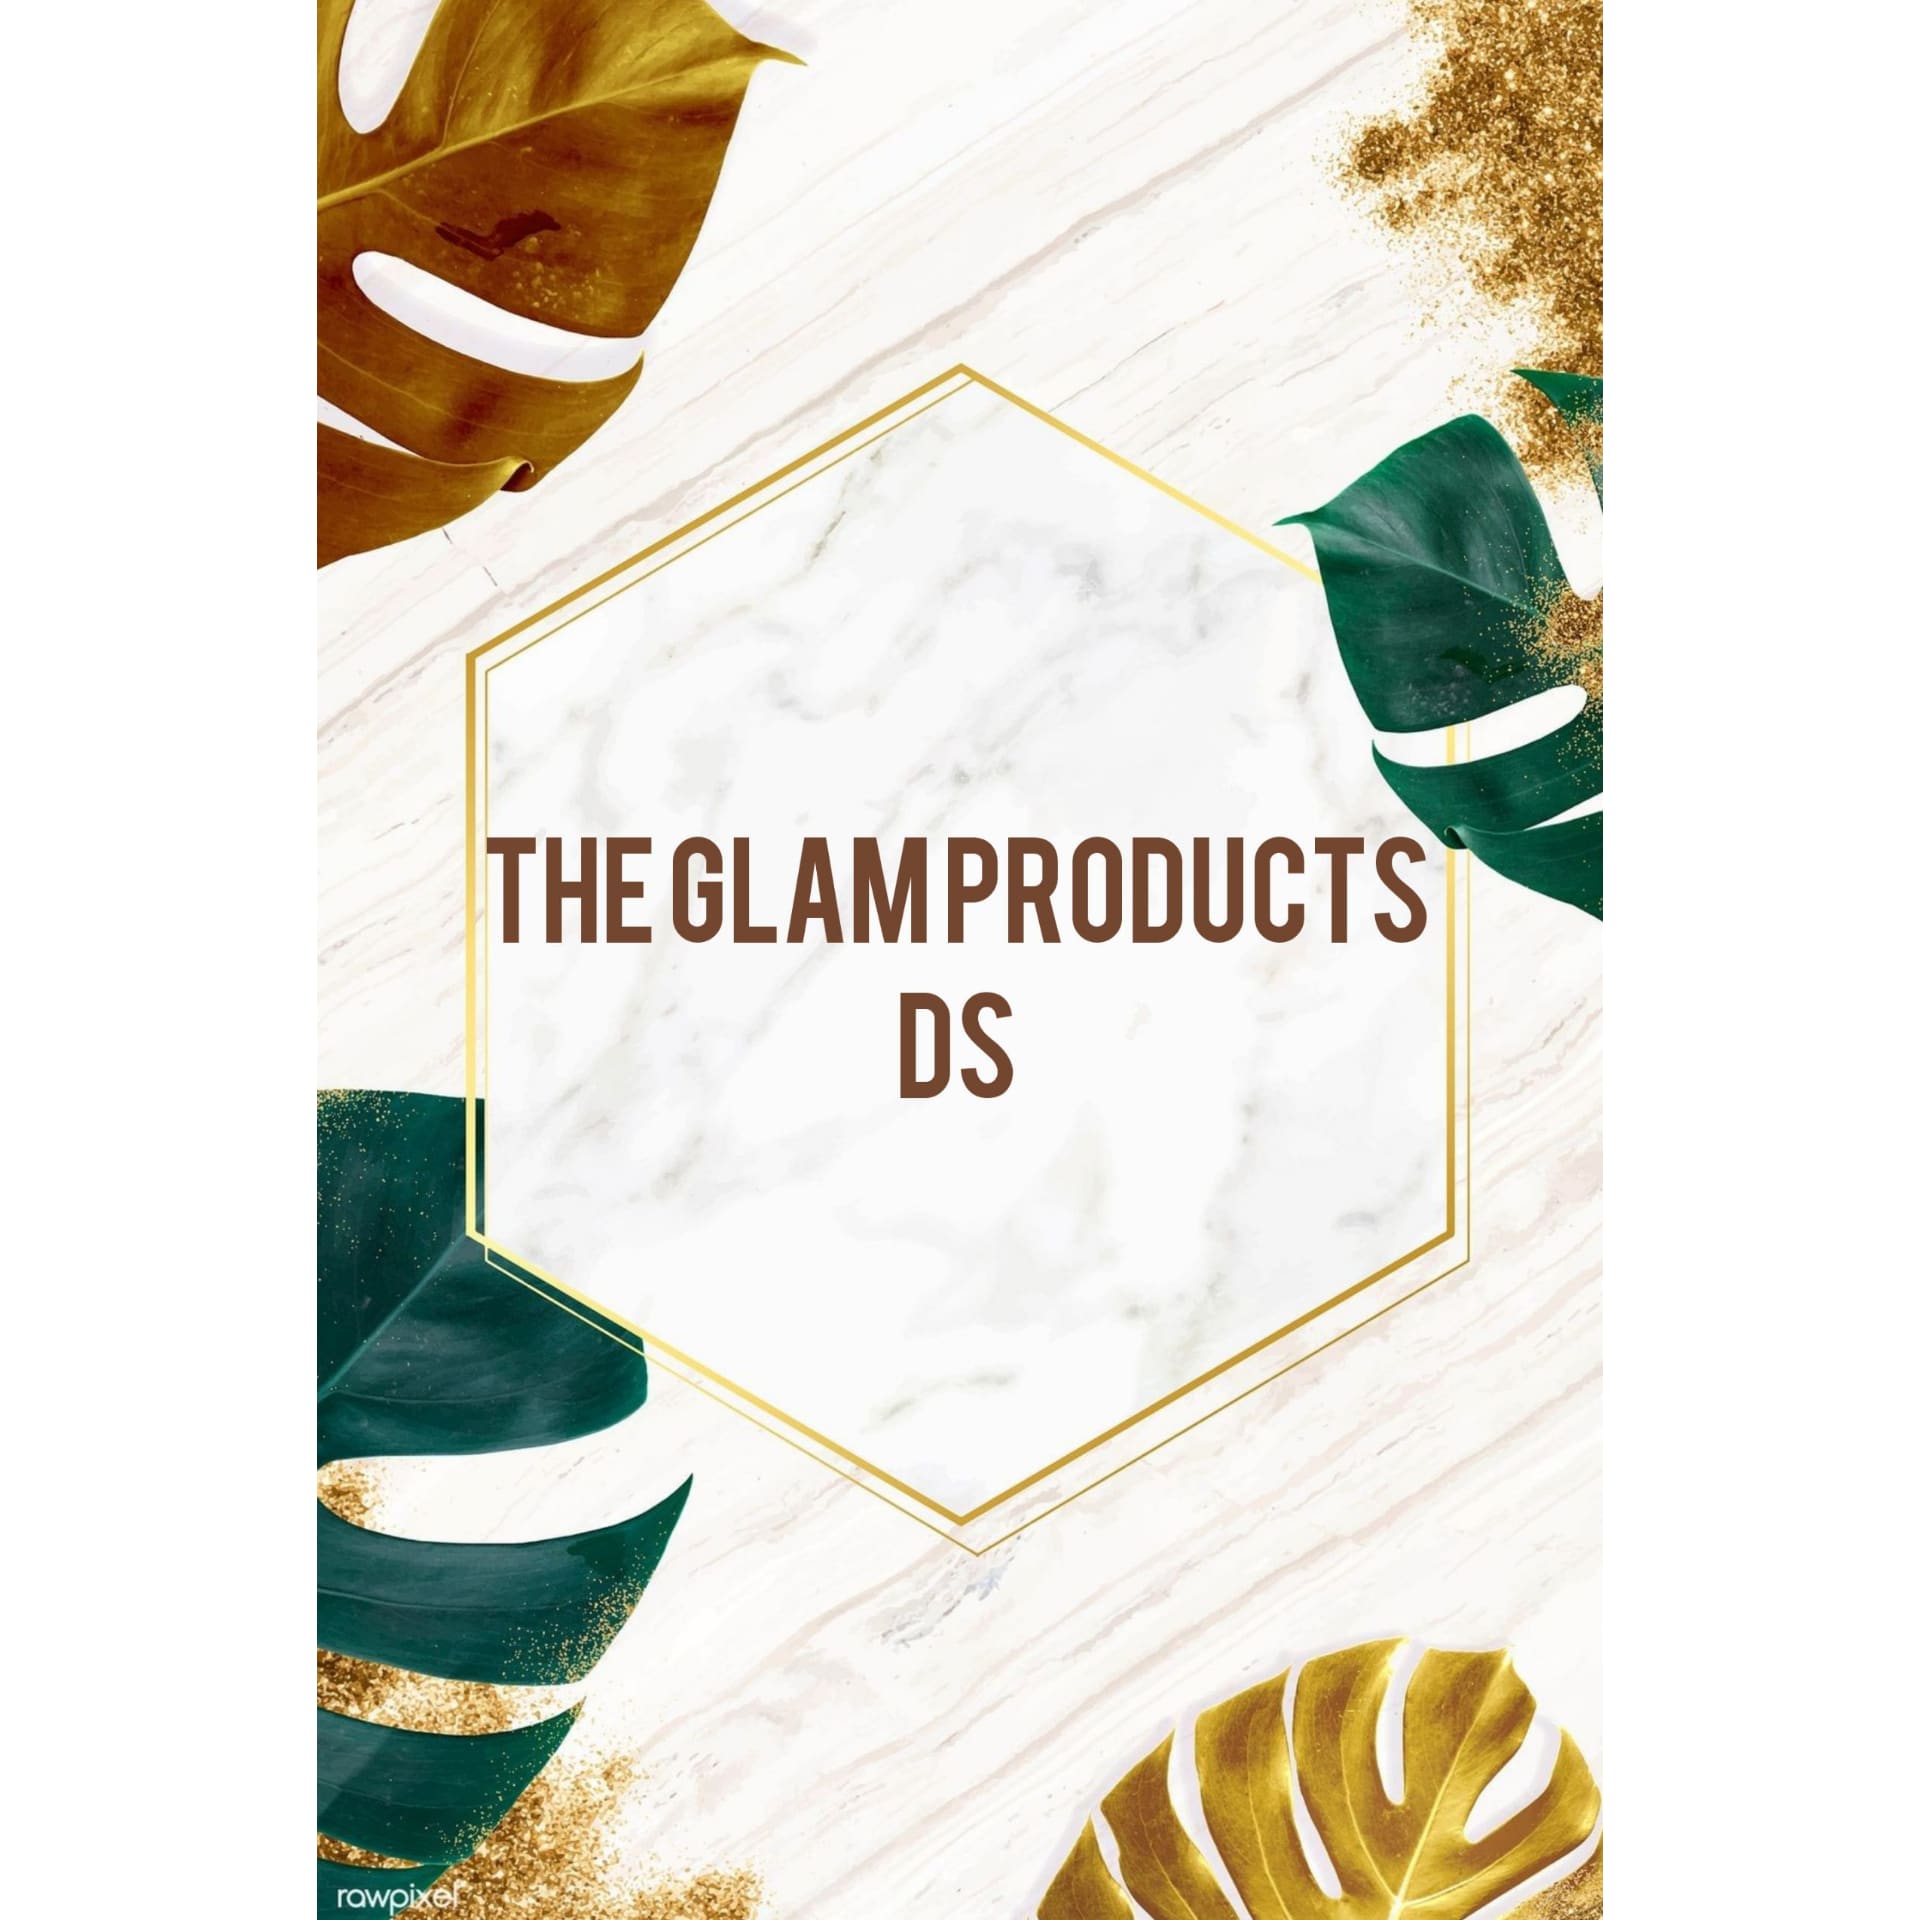 The Glam Products DS